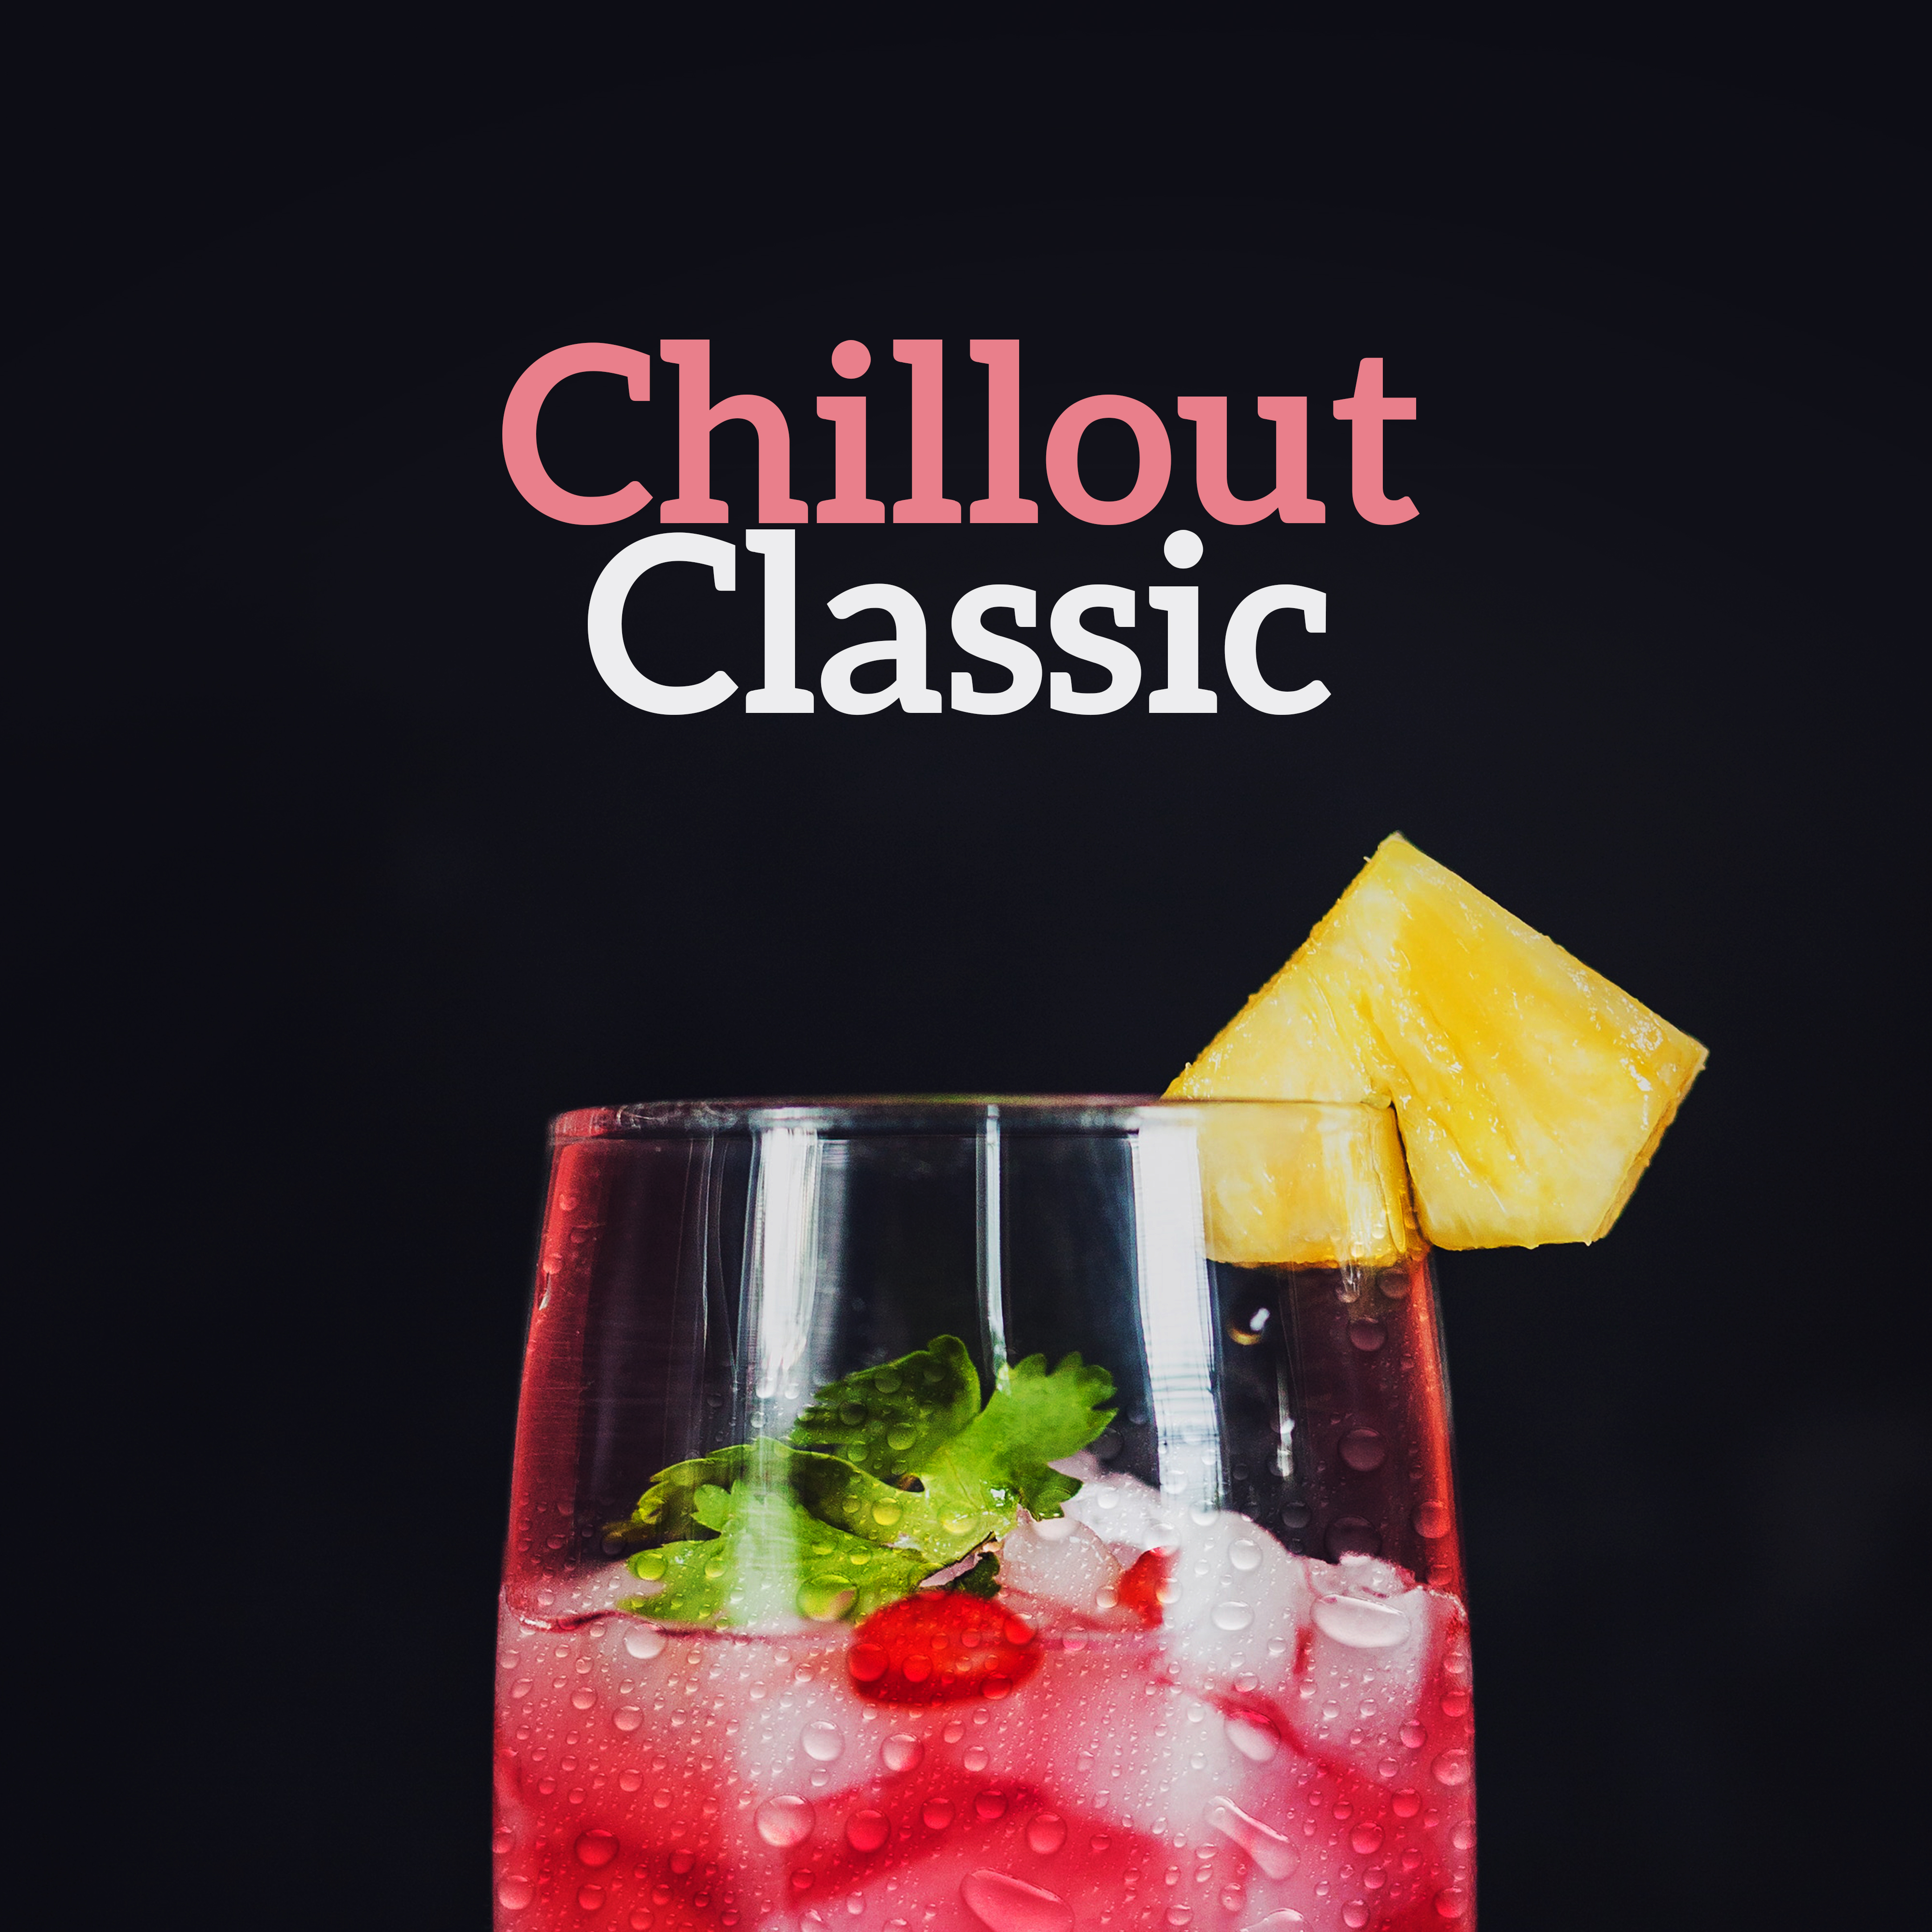 Chillout Classic – Summer Chill Out, Electronic Vibes, **** Tunes, Relaxation